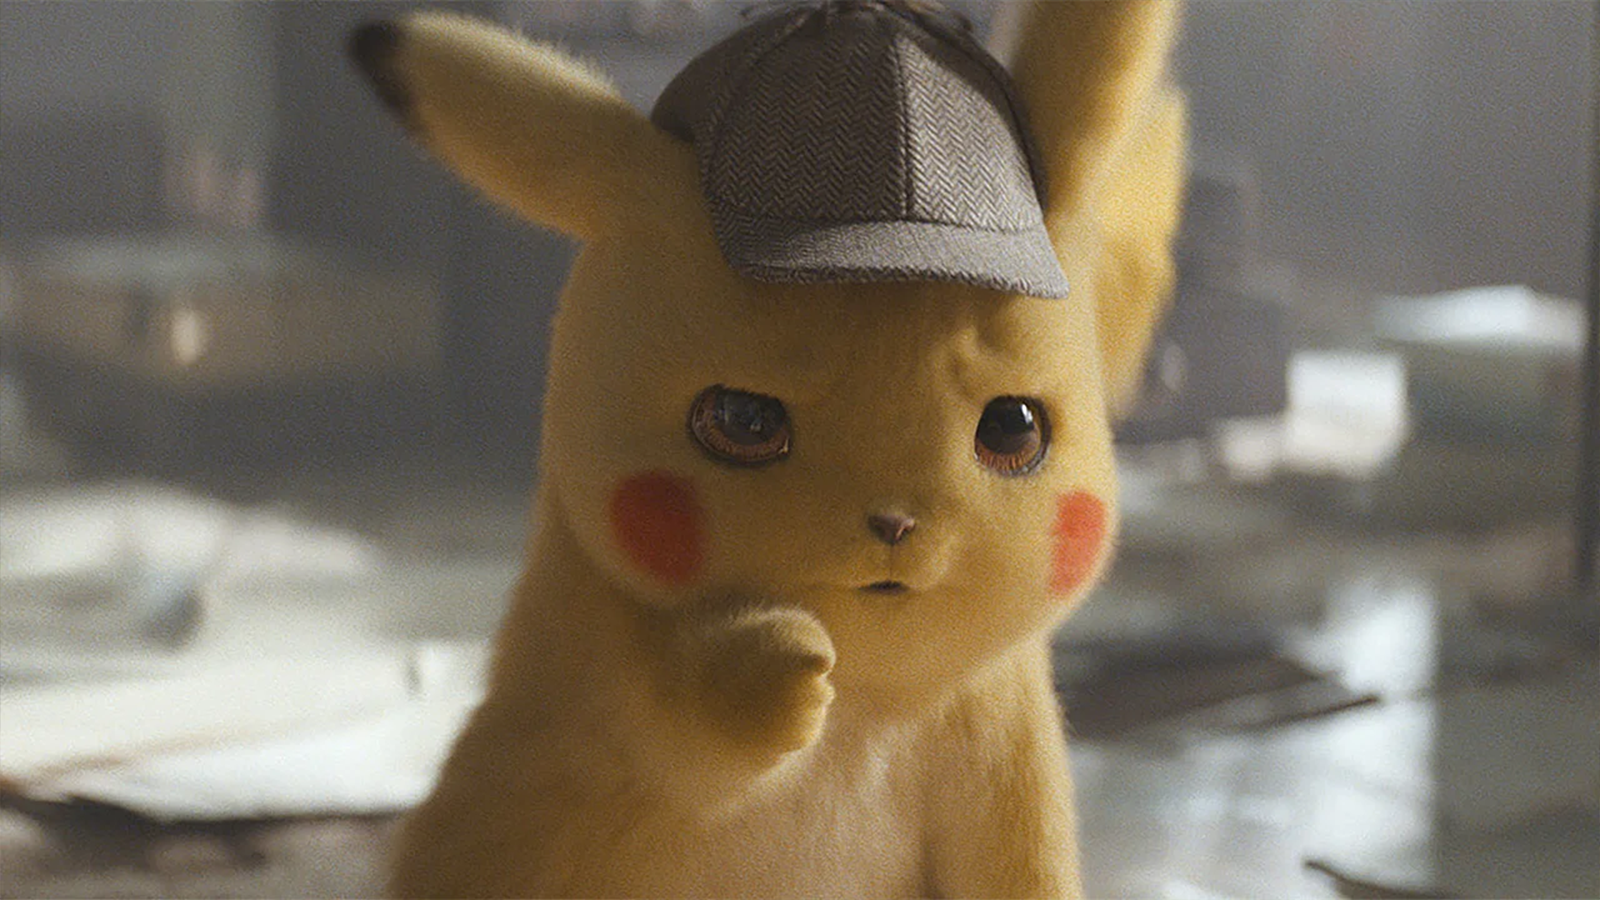 There's already a Detective Pikachu movie sequel in the works